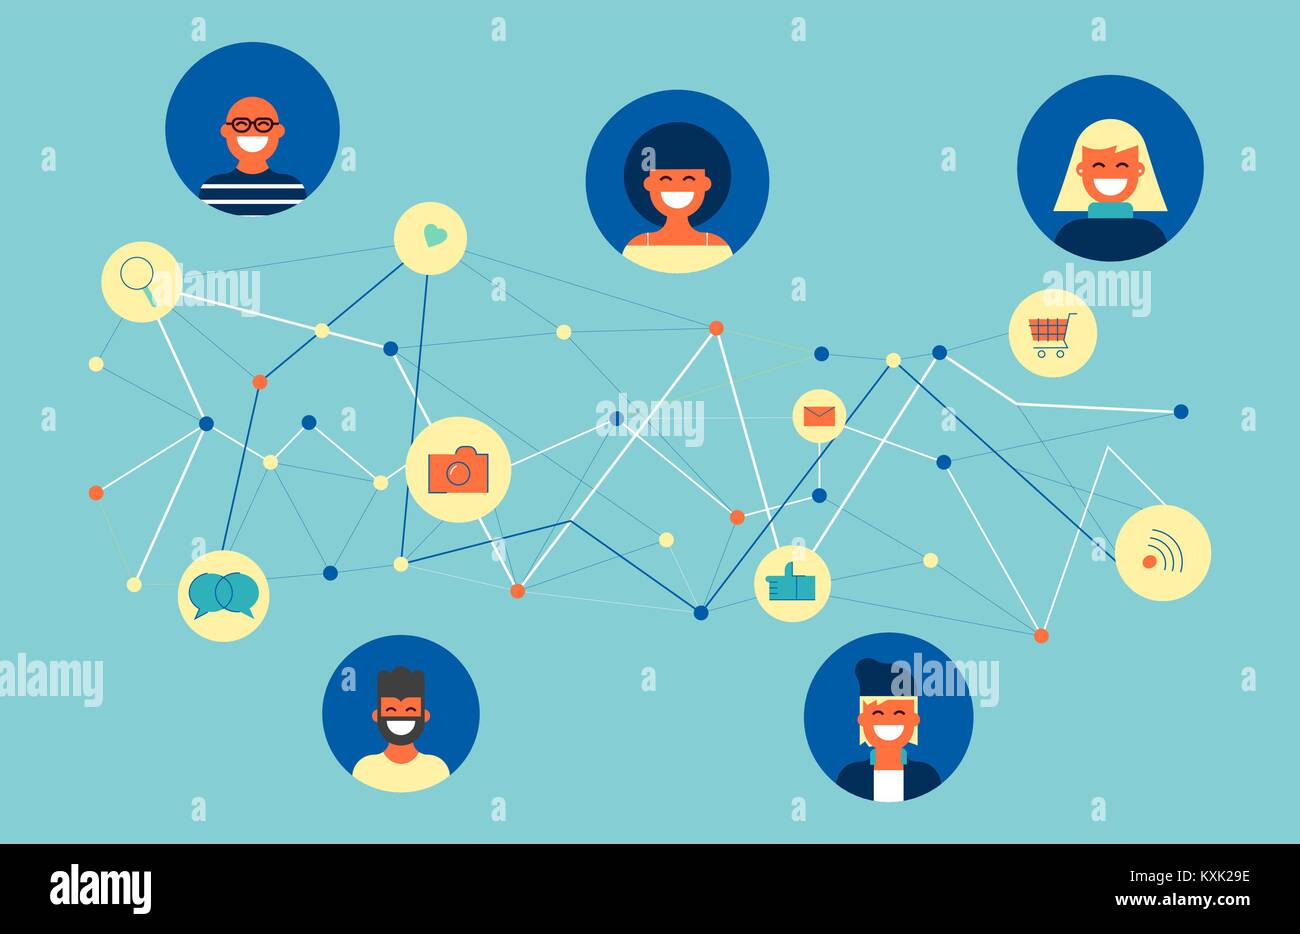 Social network concept illustration, group of multicultural people connected online to internet activities. Includes chat, mail, camera and messaging  Stock Vector